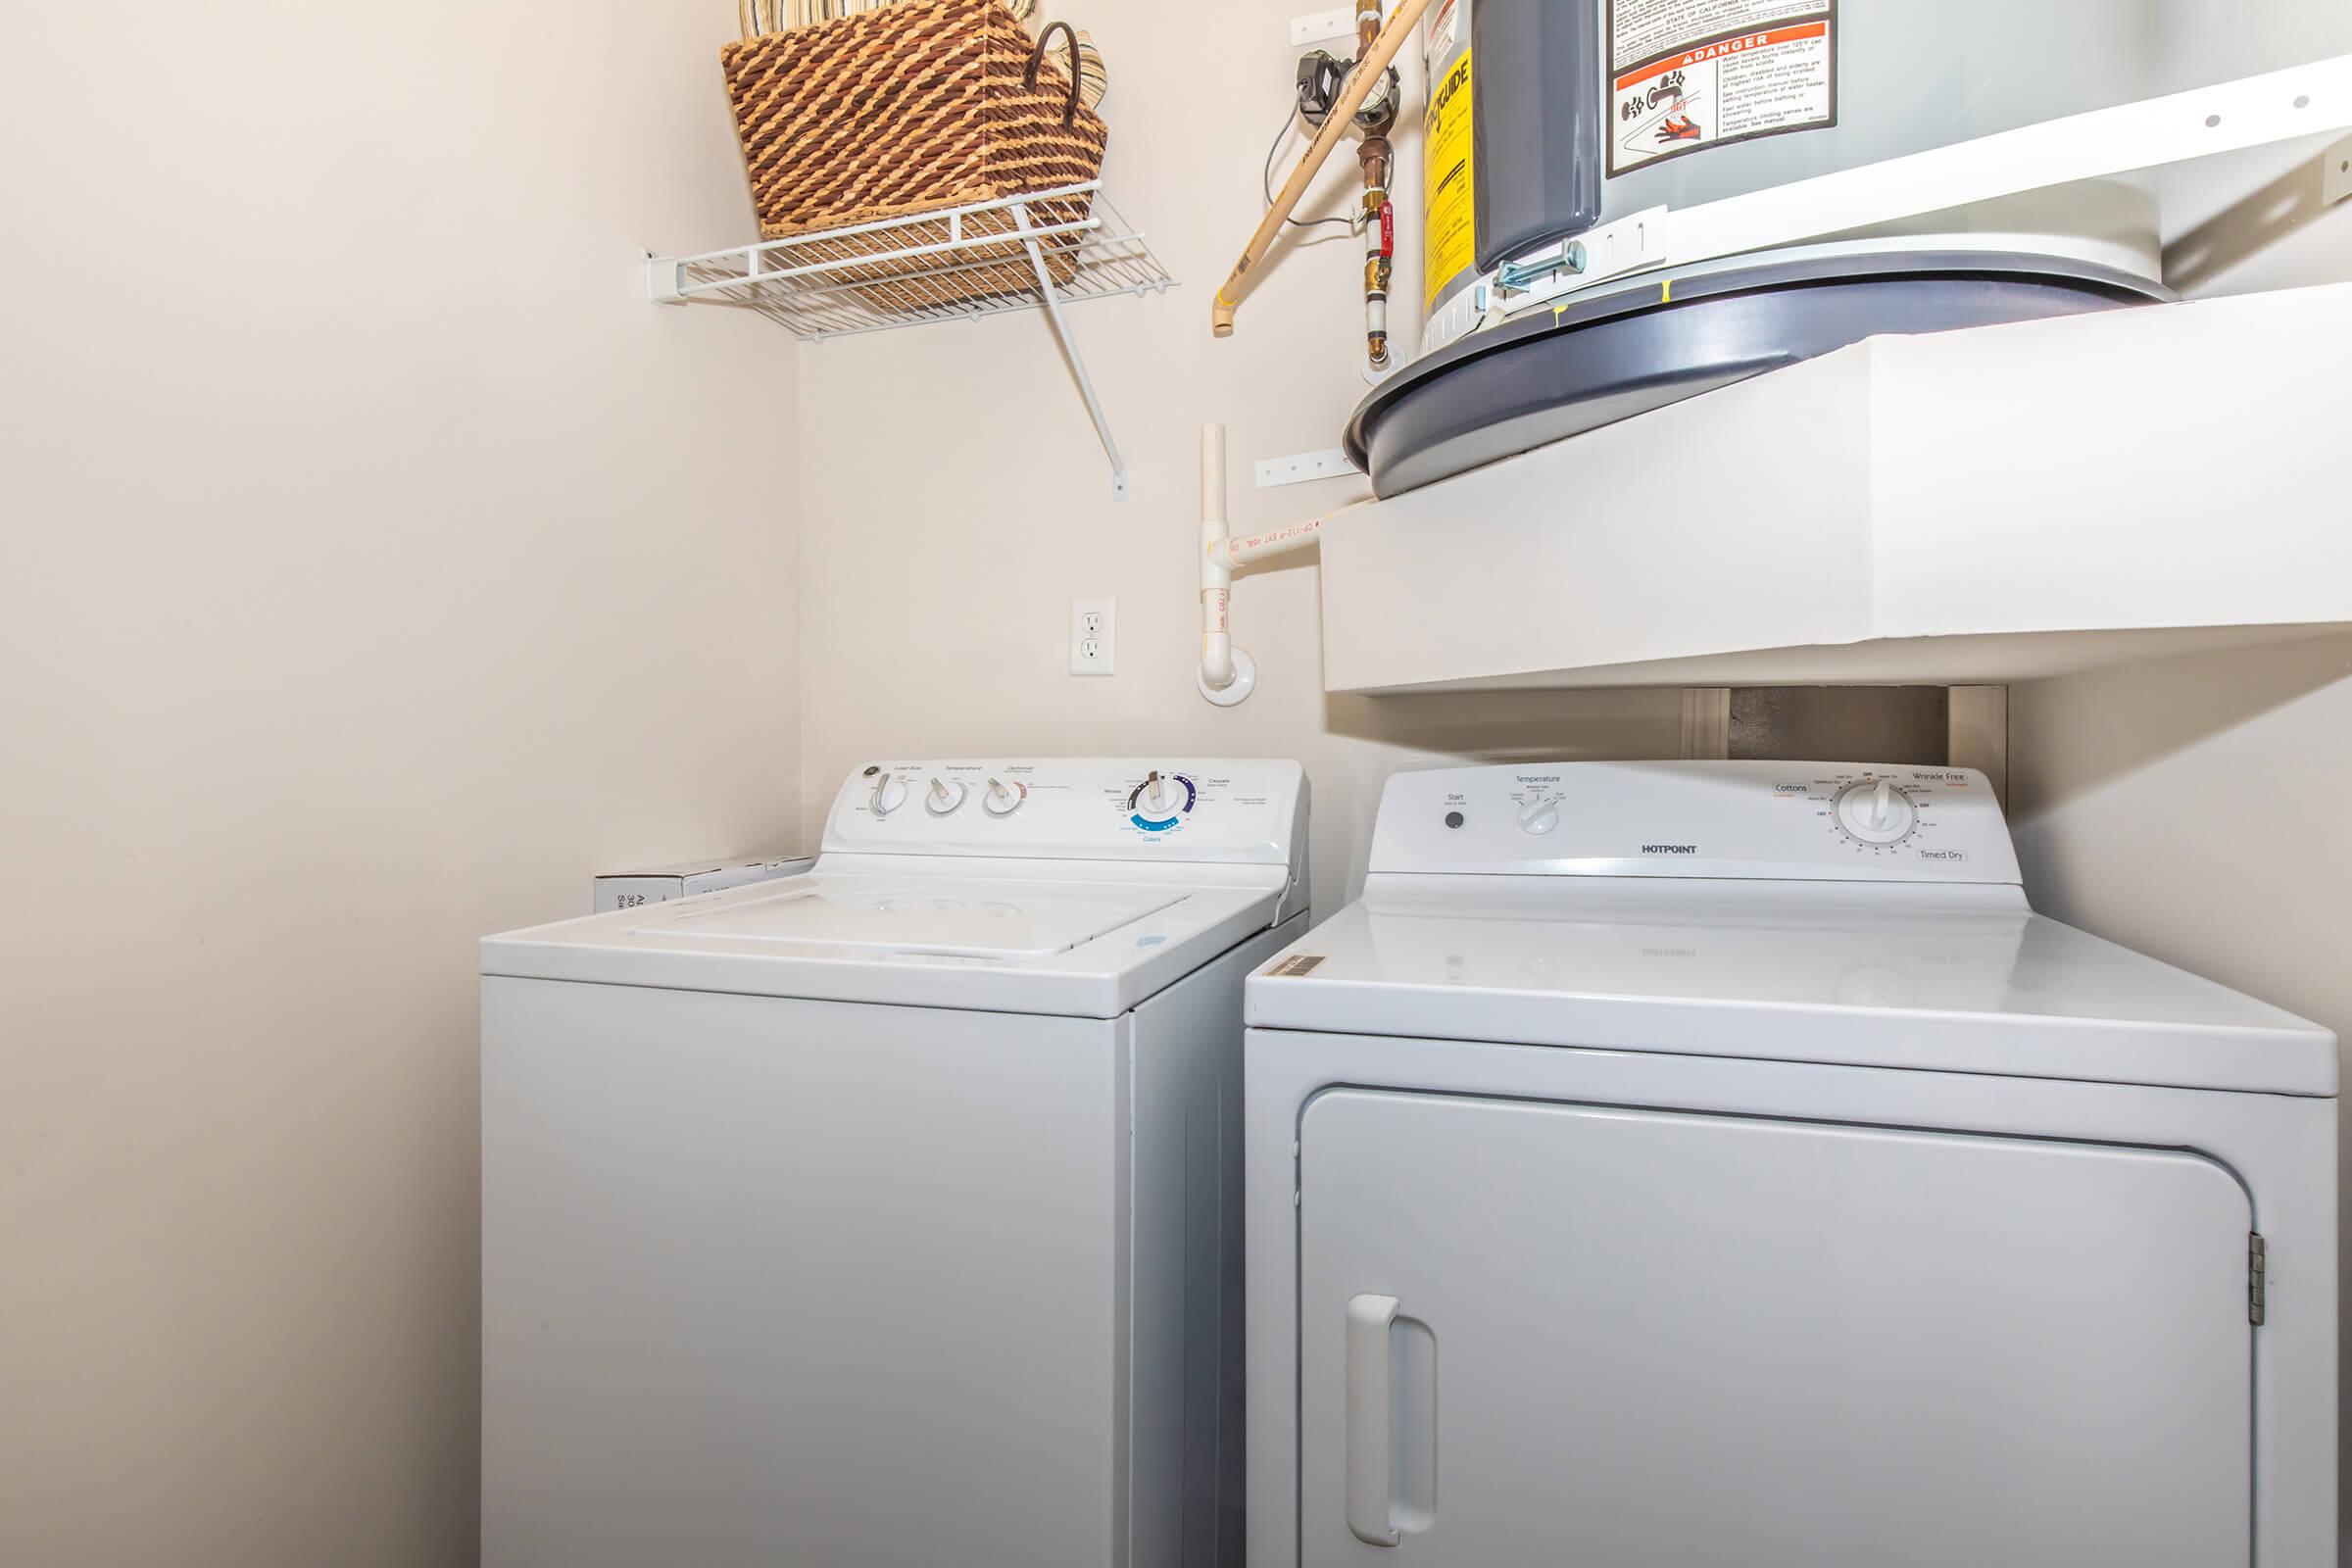 EASY ACCESS WASHER AND DRYER AVAILABLE